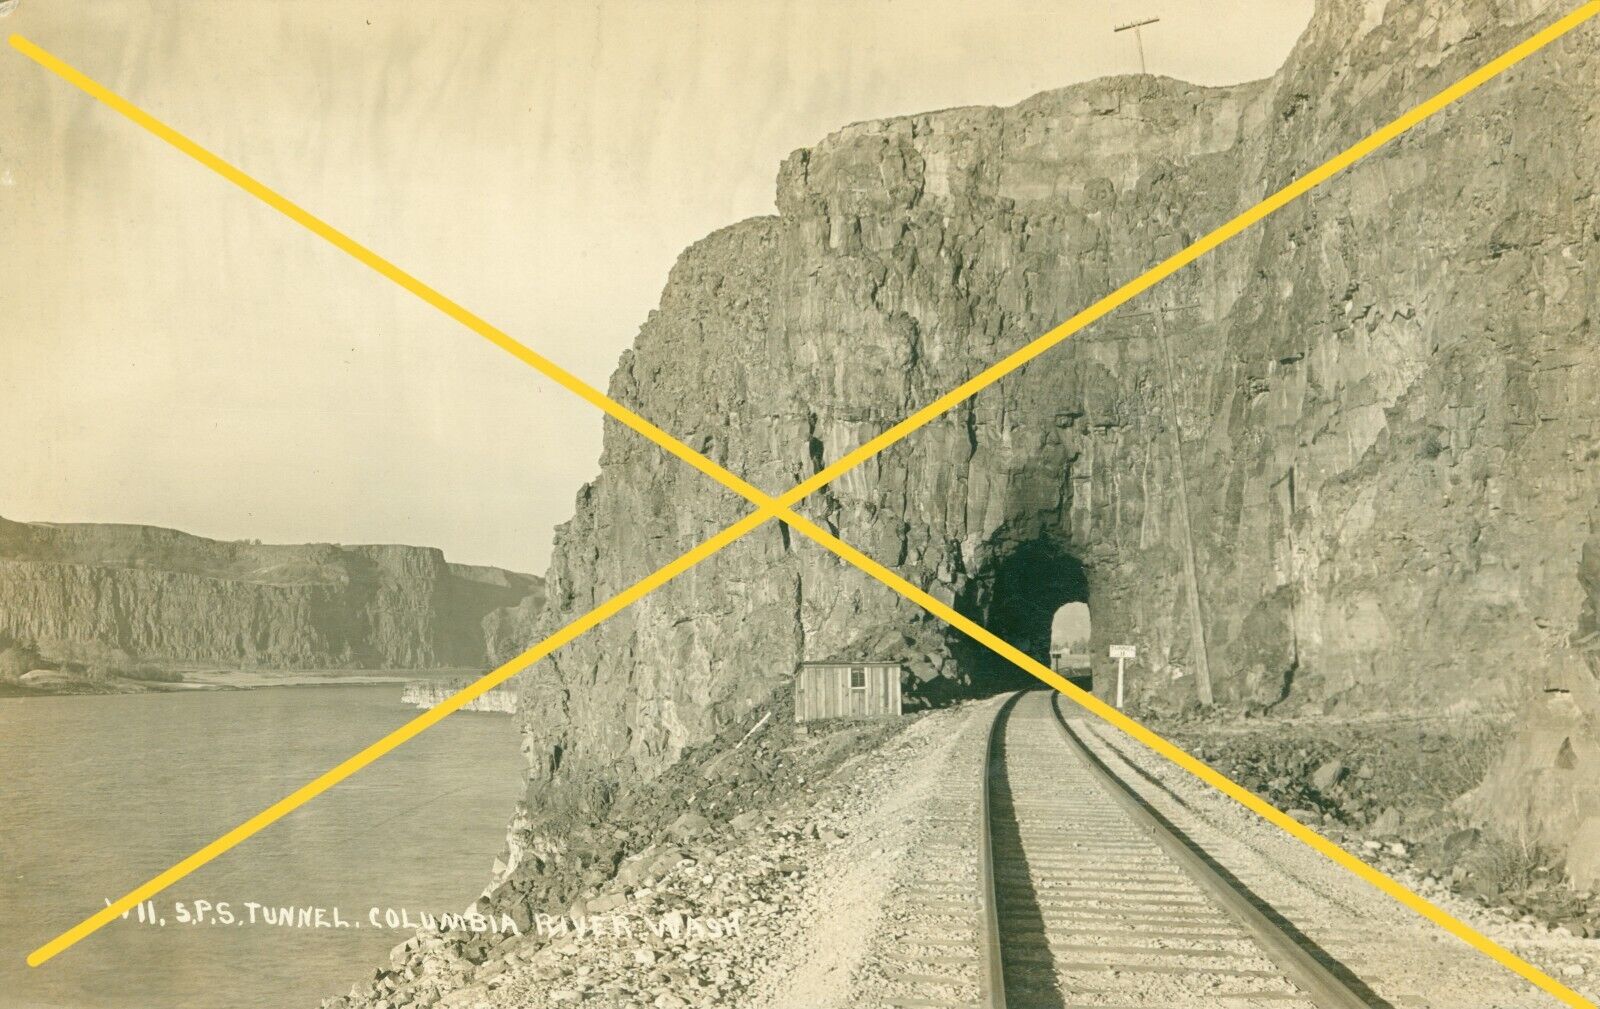 RARE view of Tunnel 11 outside Lyle WA Klickitat County S.P.S. Columbia River